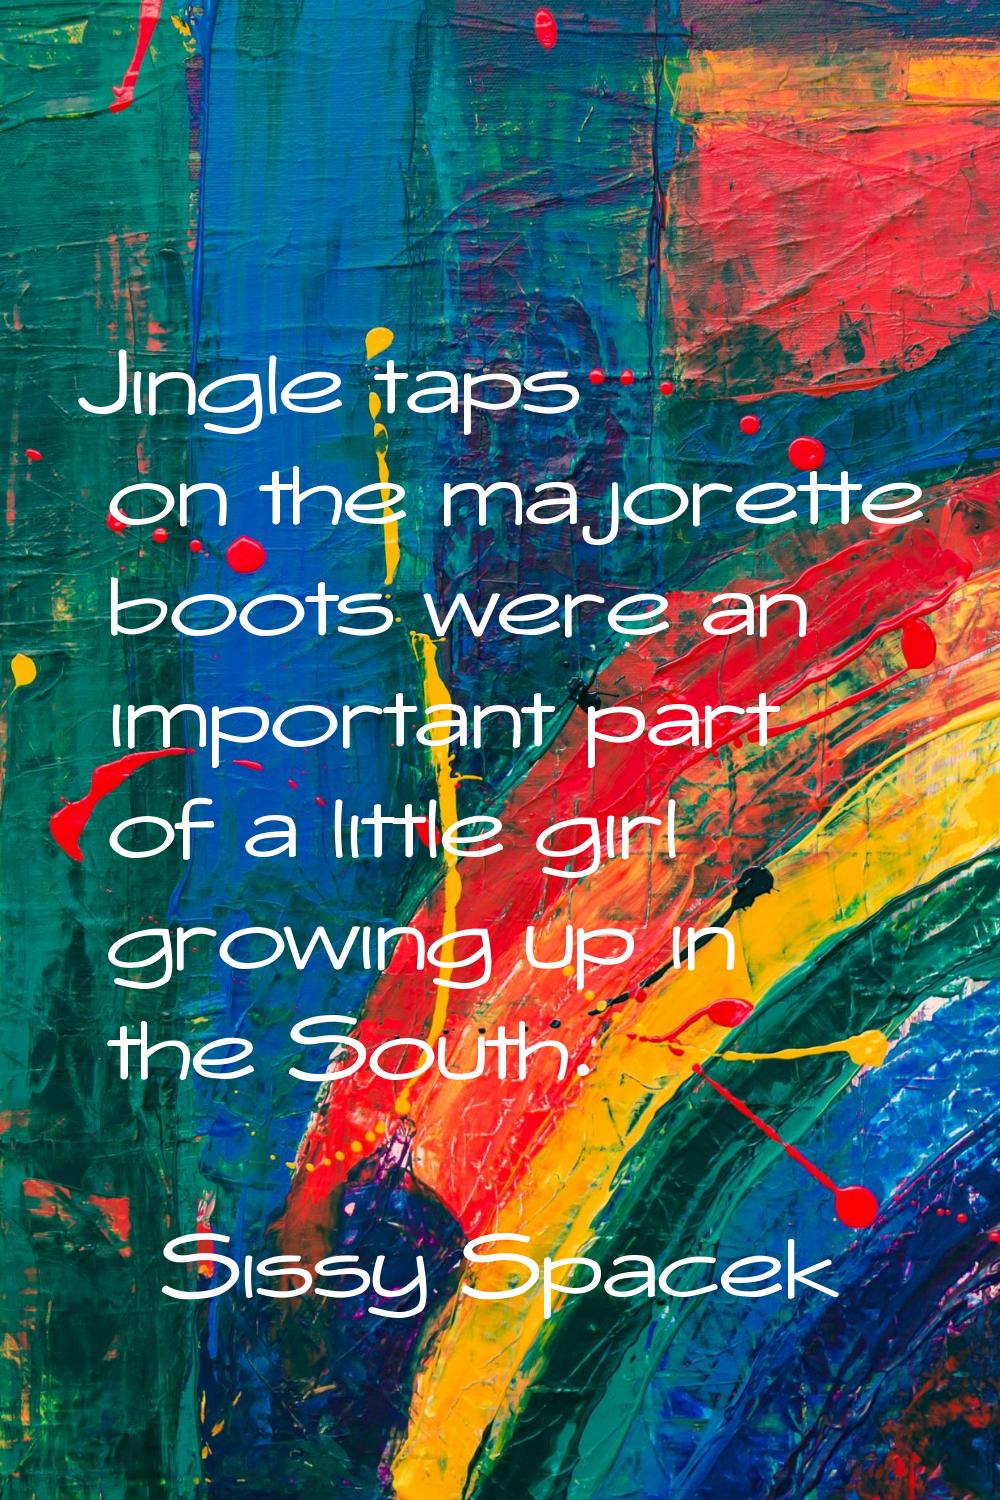 Jingle taps on the majorette boots were an important part of a little girl growing up in the South.